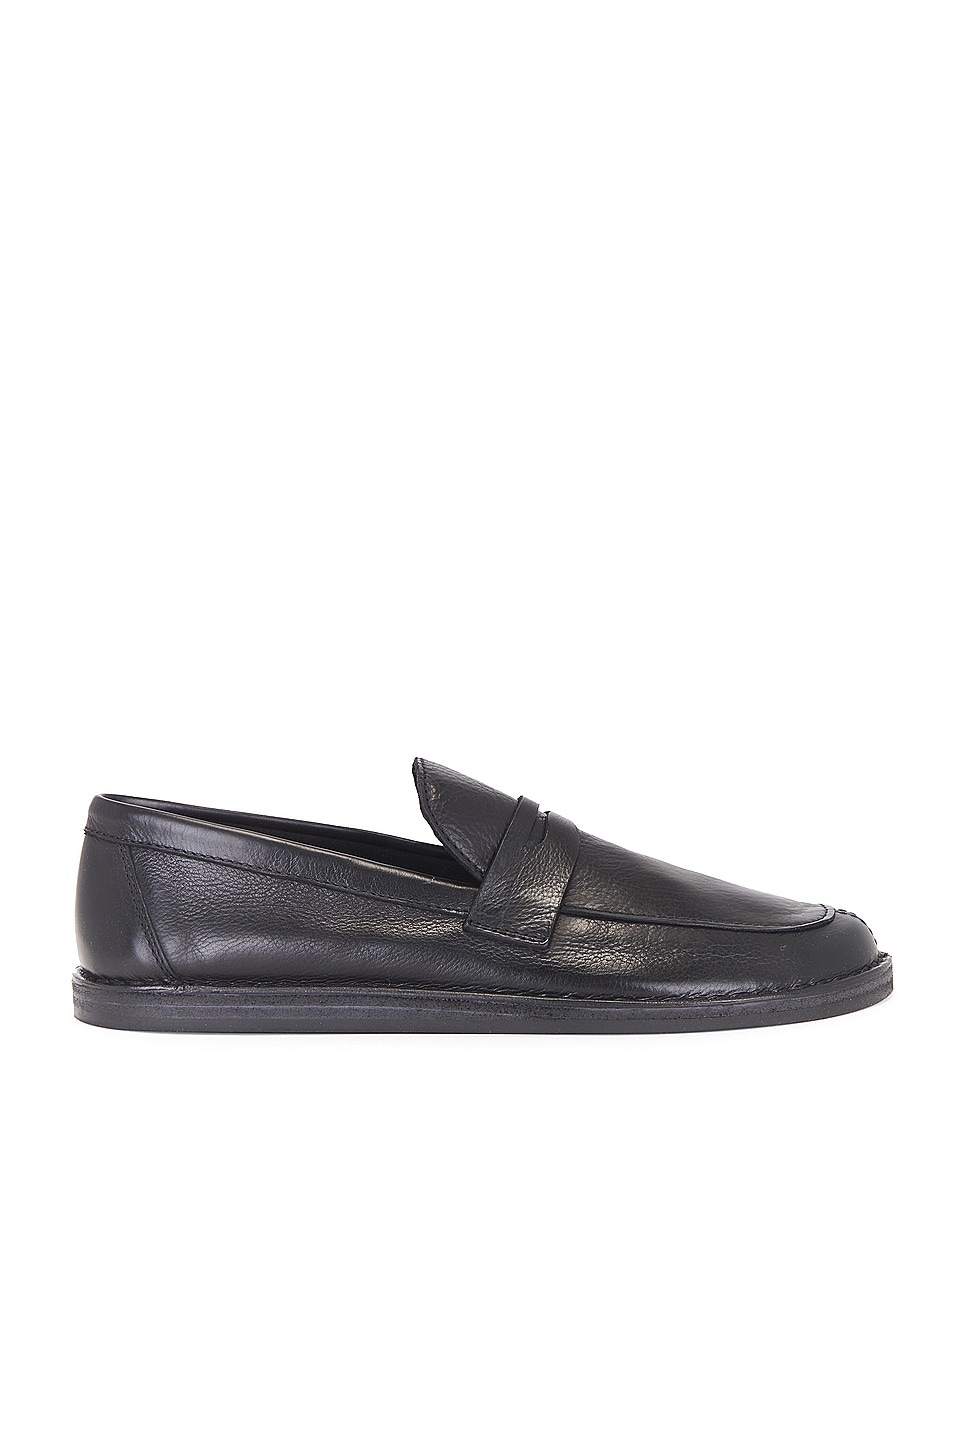 Image 1 of The Row Cary Loafer in BLACK